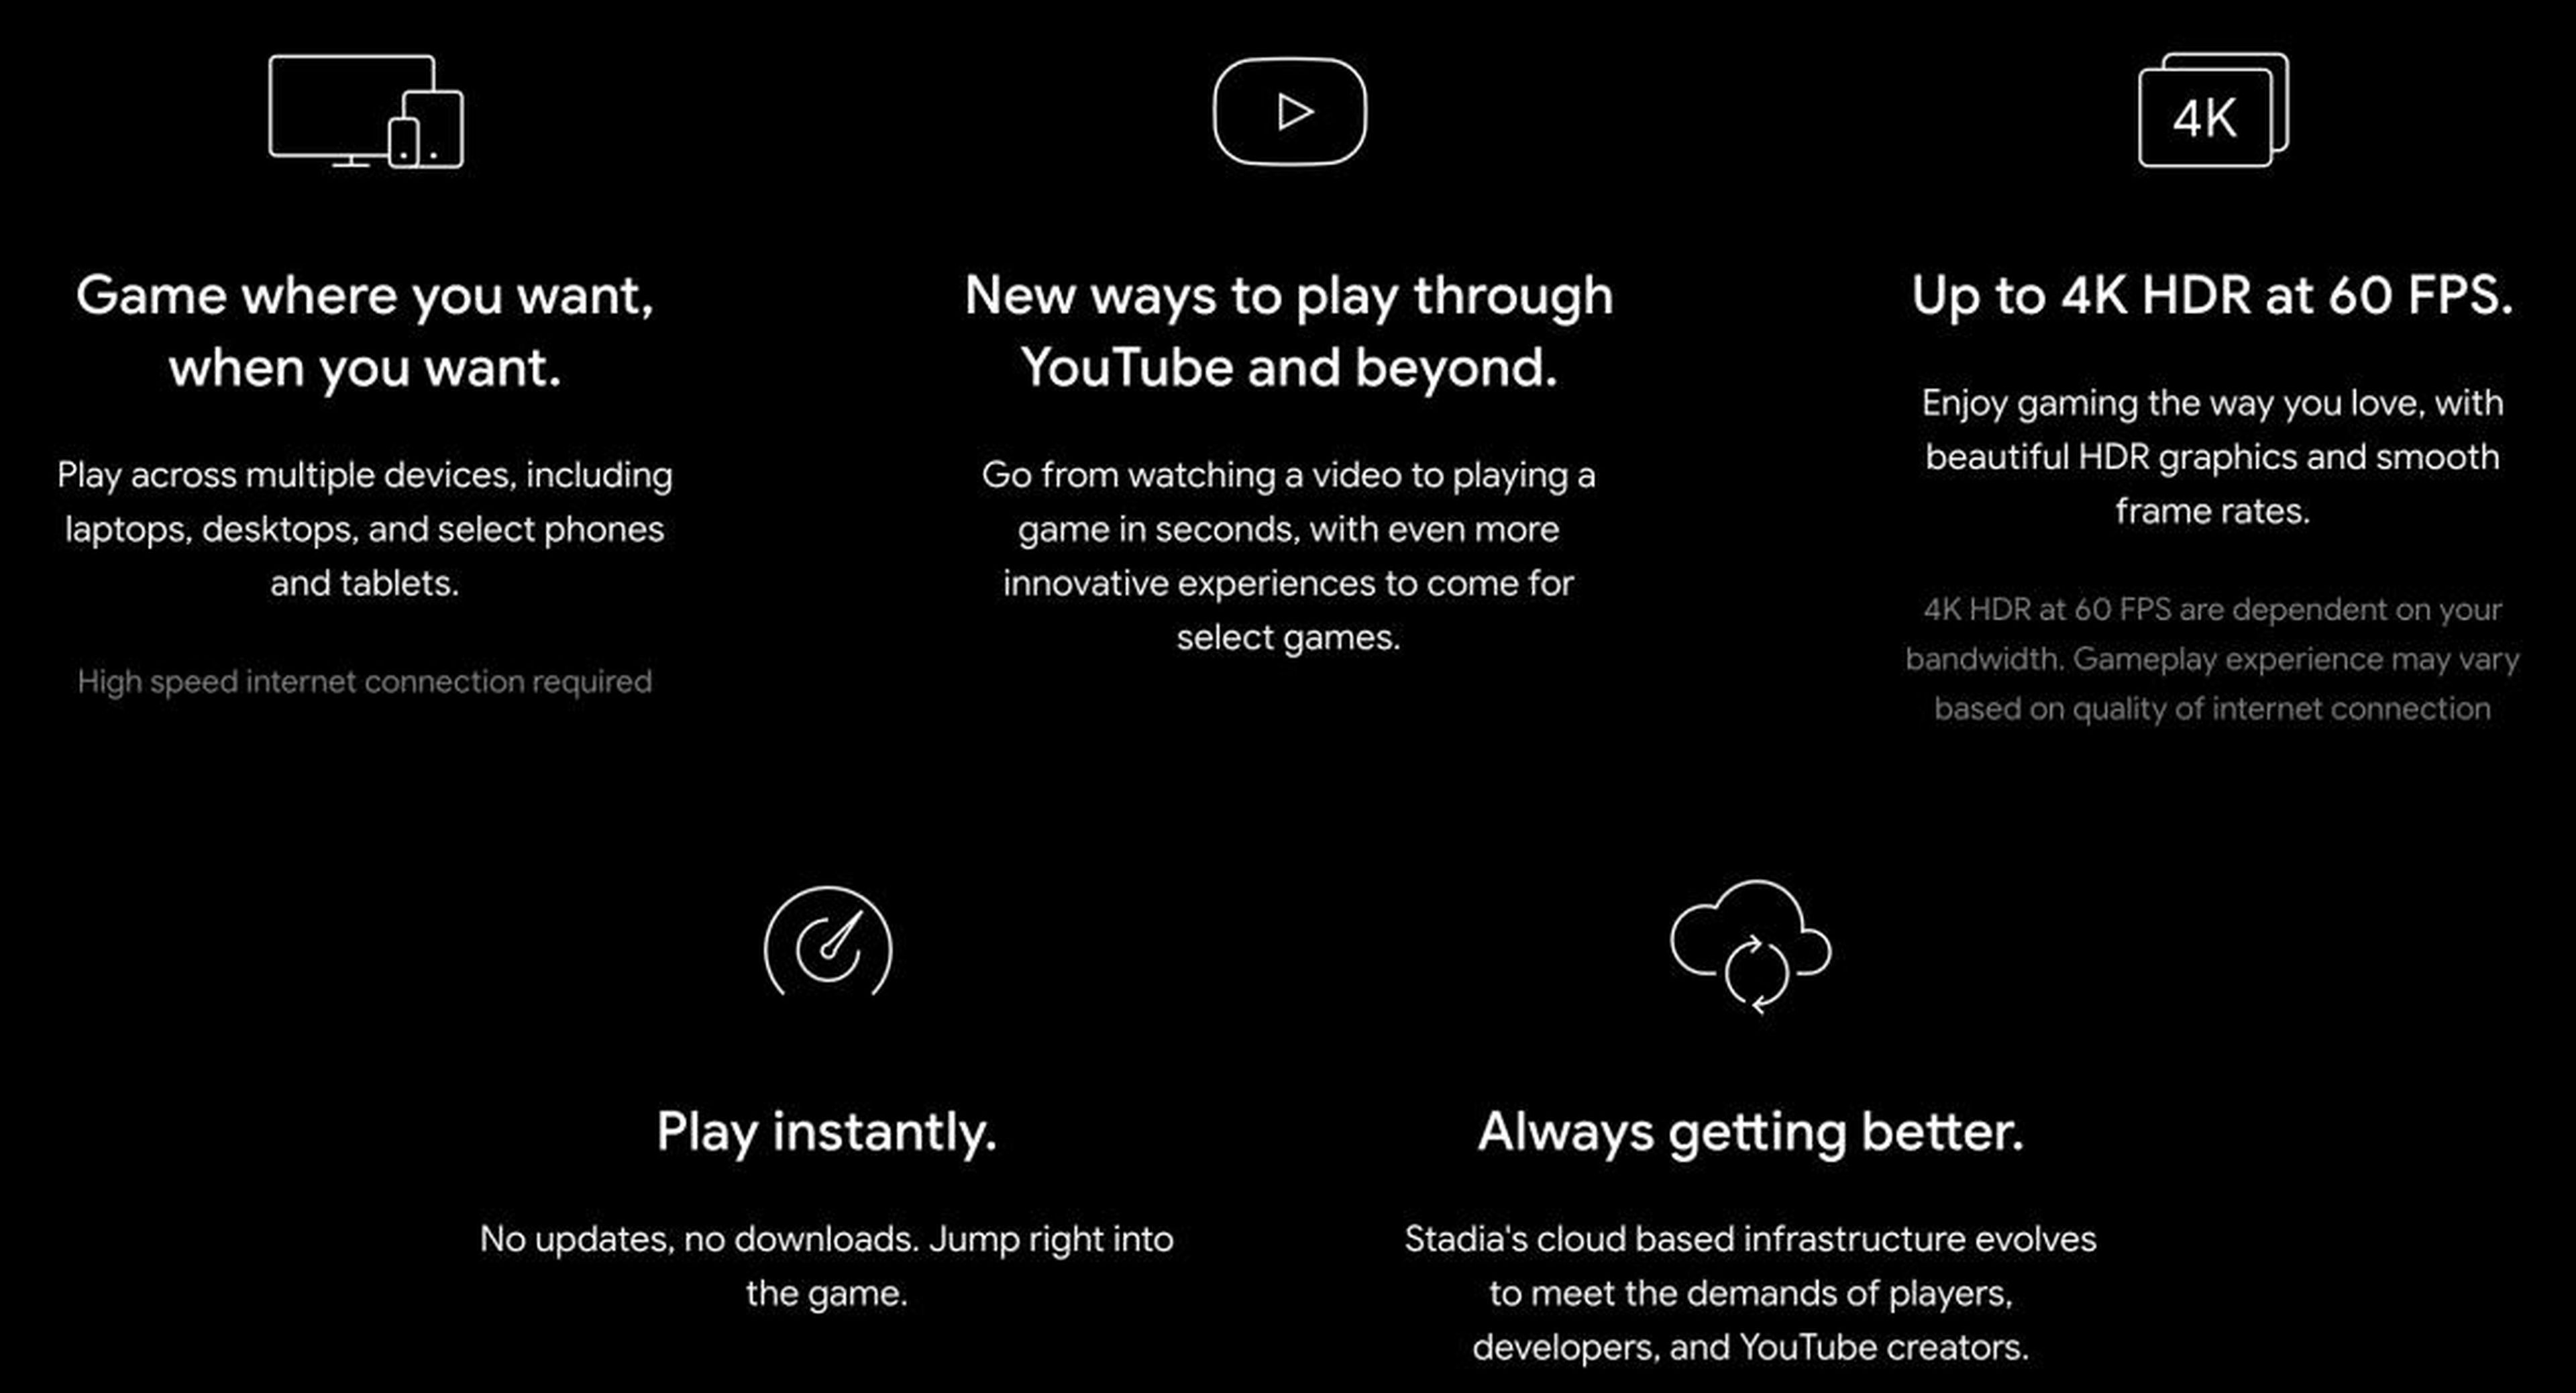 The sell points for Google Stadia.